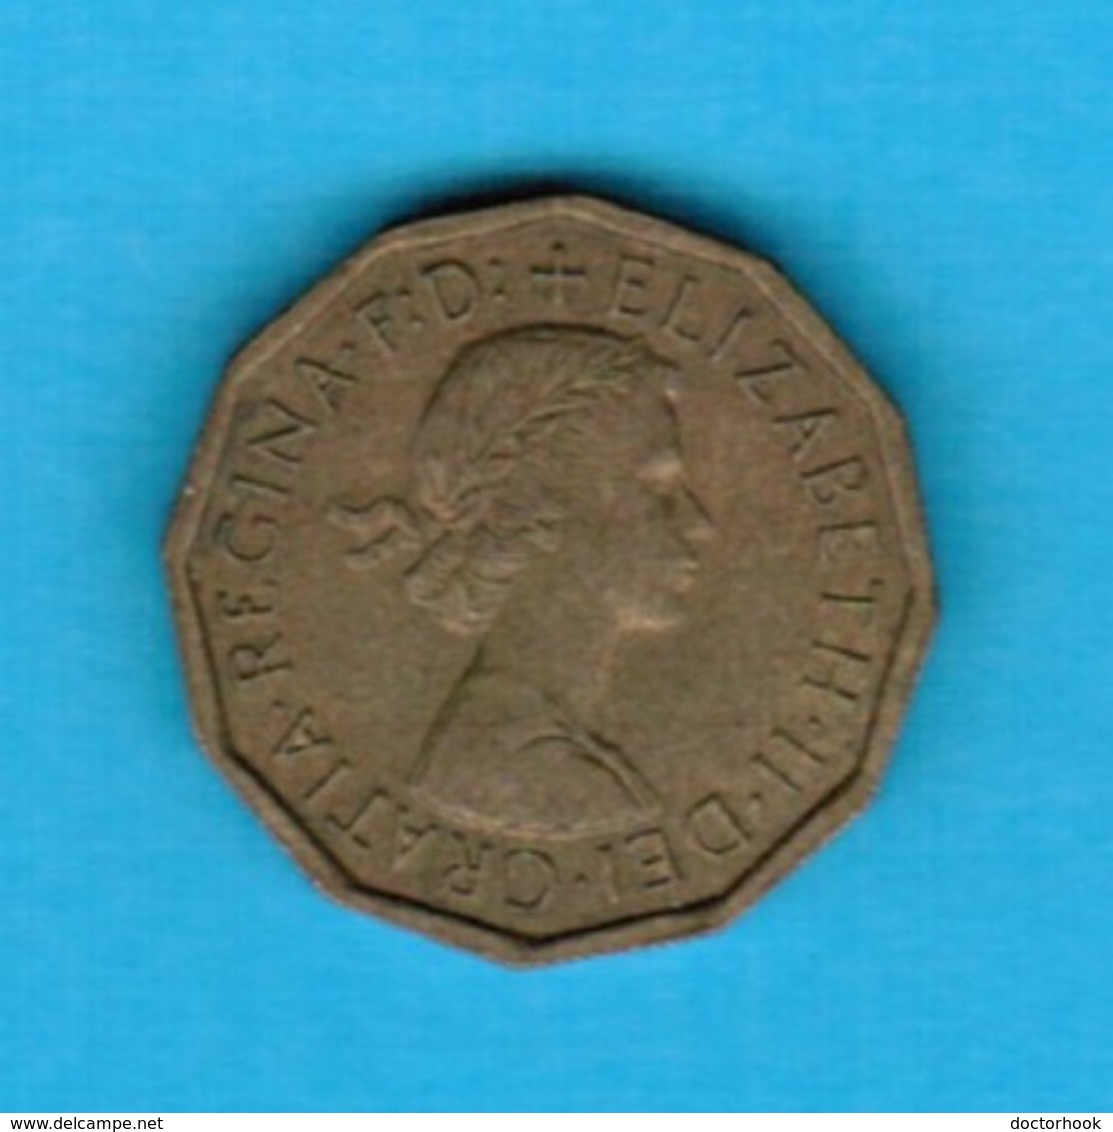 GREAT BRITAIN  3 PENCE 1964 (KM # 900) #5252 - F. 3 Pence